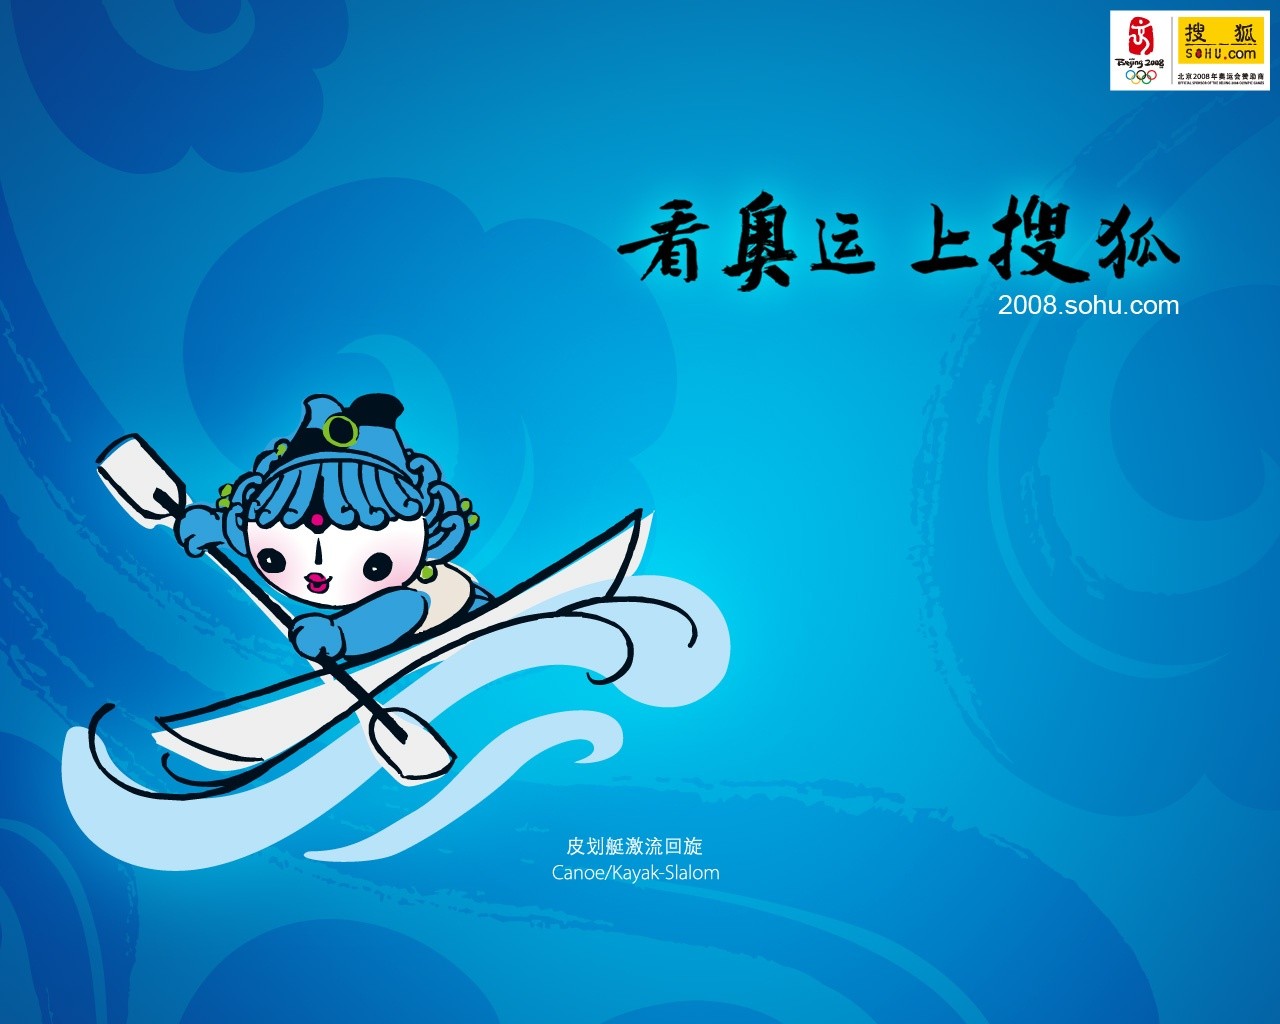 08 Olympic Games Fuwa Wallpapers #14 - 1280x1024